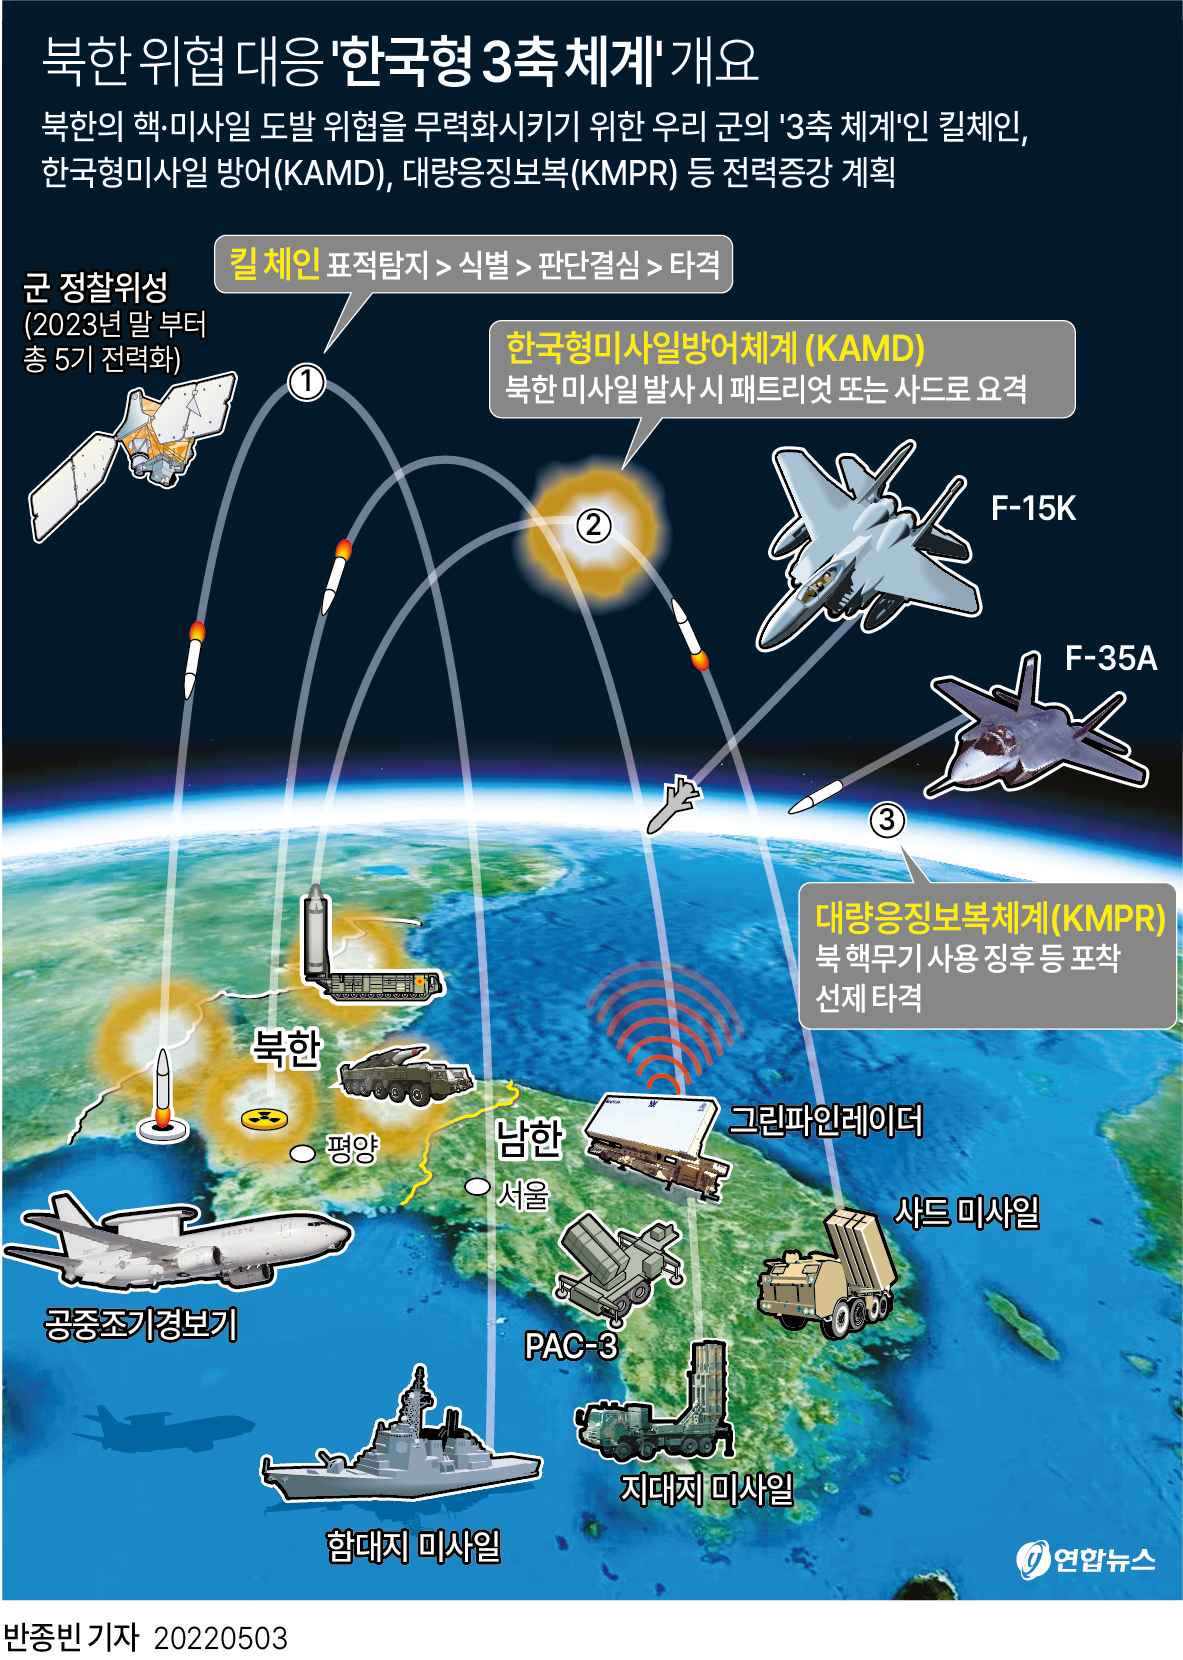 This image shows the concept of the three-axis system, referring to the Korea Massive Punishment and Retaliation; the Kill Chain pre-emptive strike platform; and the Korea Air and Missile Defense system. (Yonhap)